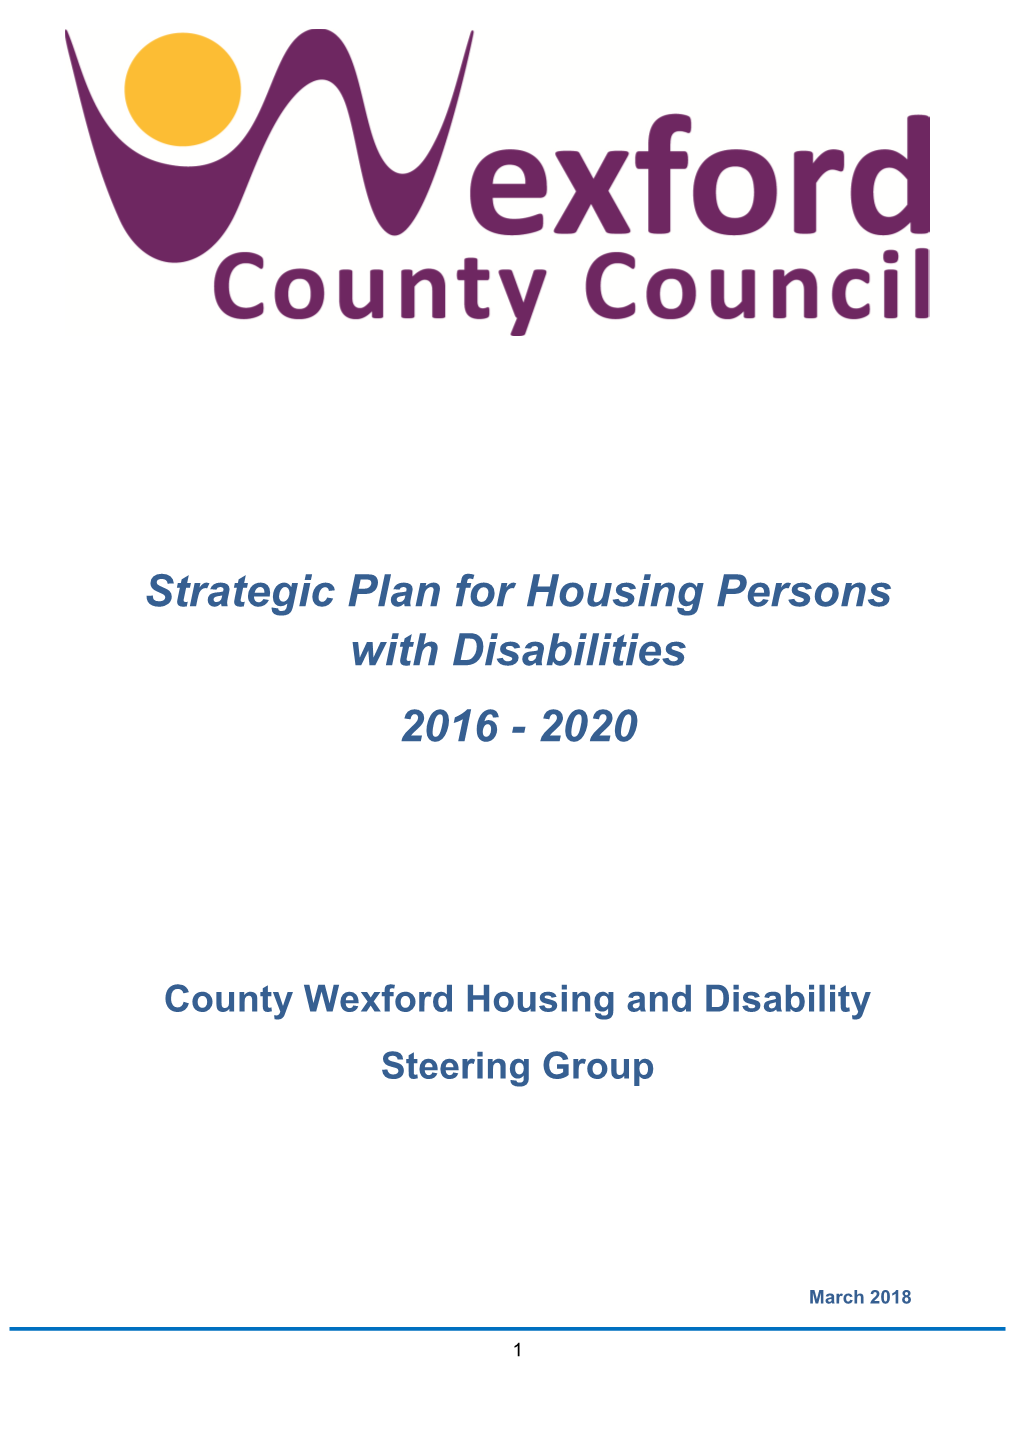 Strategic Plan for Housing Persons with Disabilities 2016 - 2020